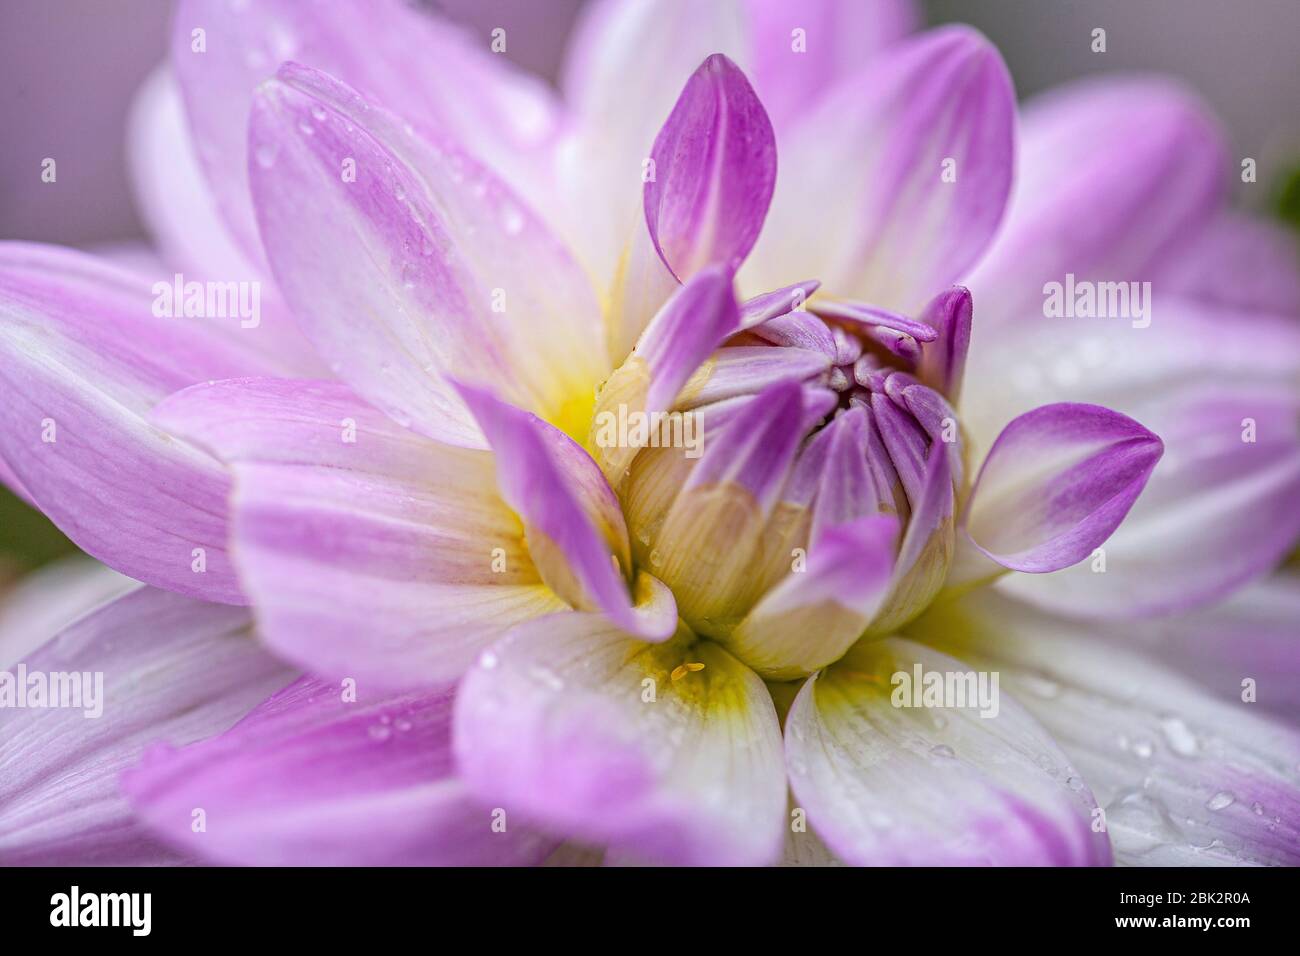 A single dahlia bloom, close up in natural light. Full frame. Stock Photo